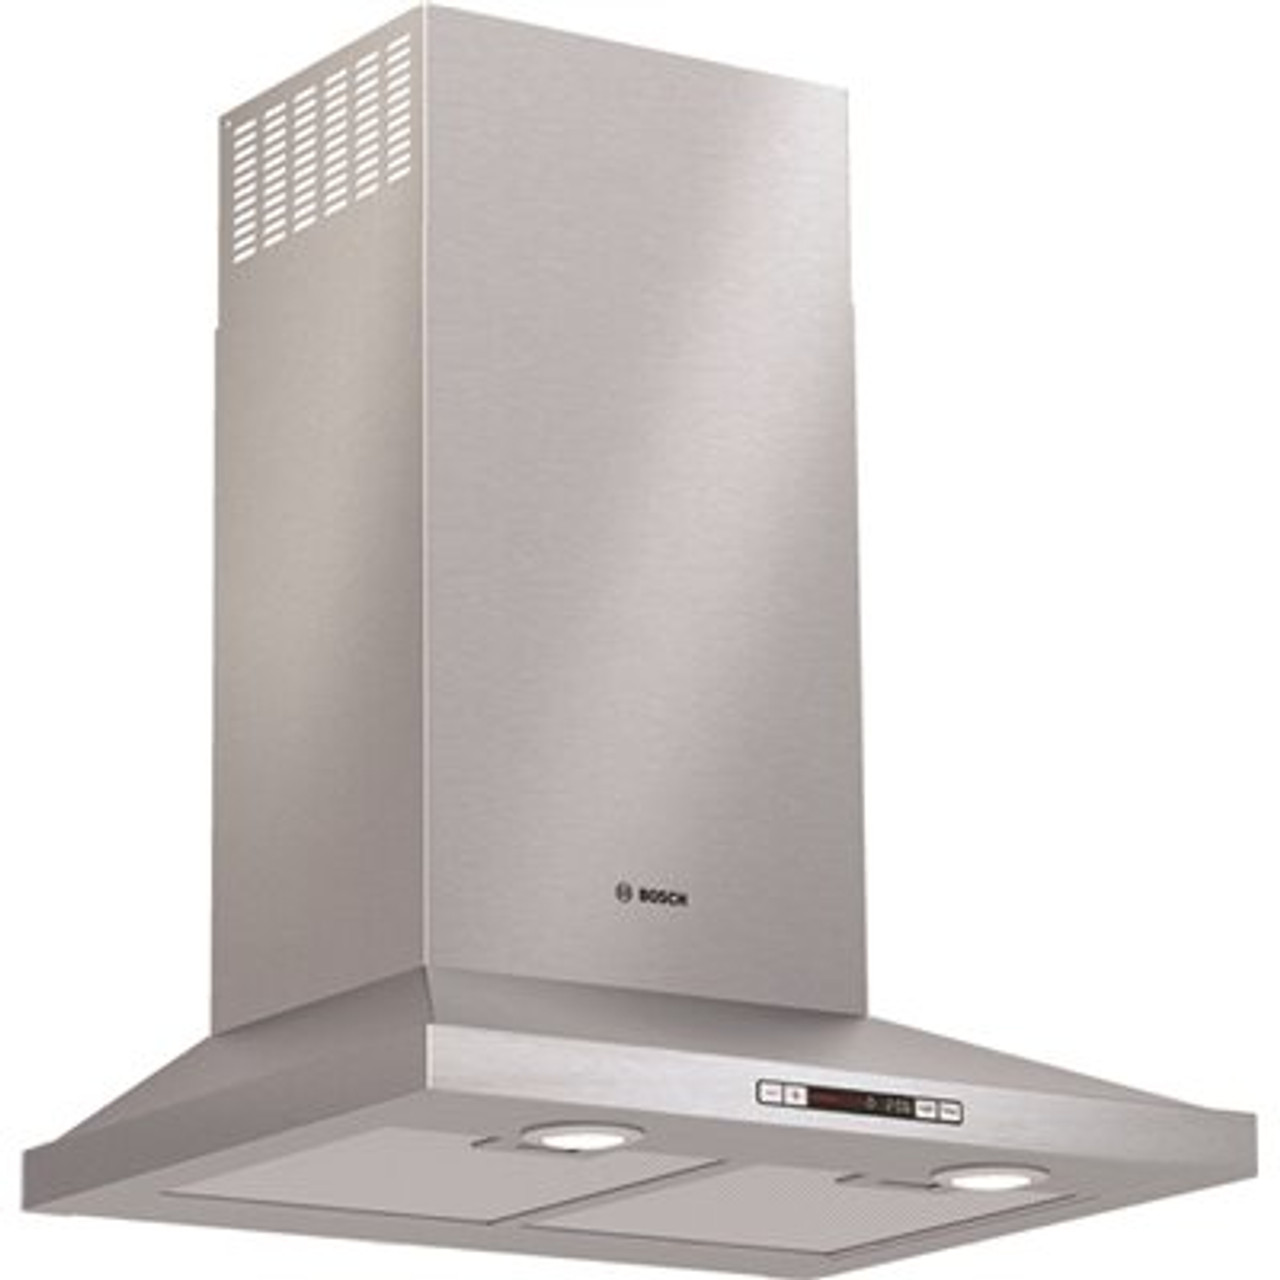 Bosch 300 Series 24 in. 300 CFM Convertible Wall Mount Range Hood with light in Stainless Steel